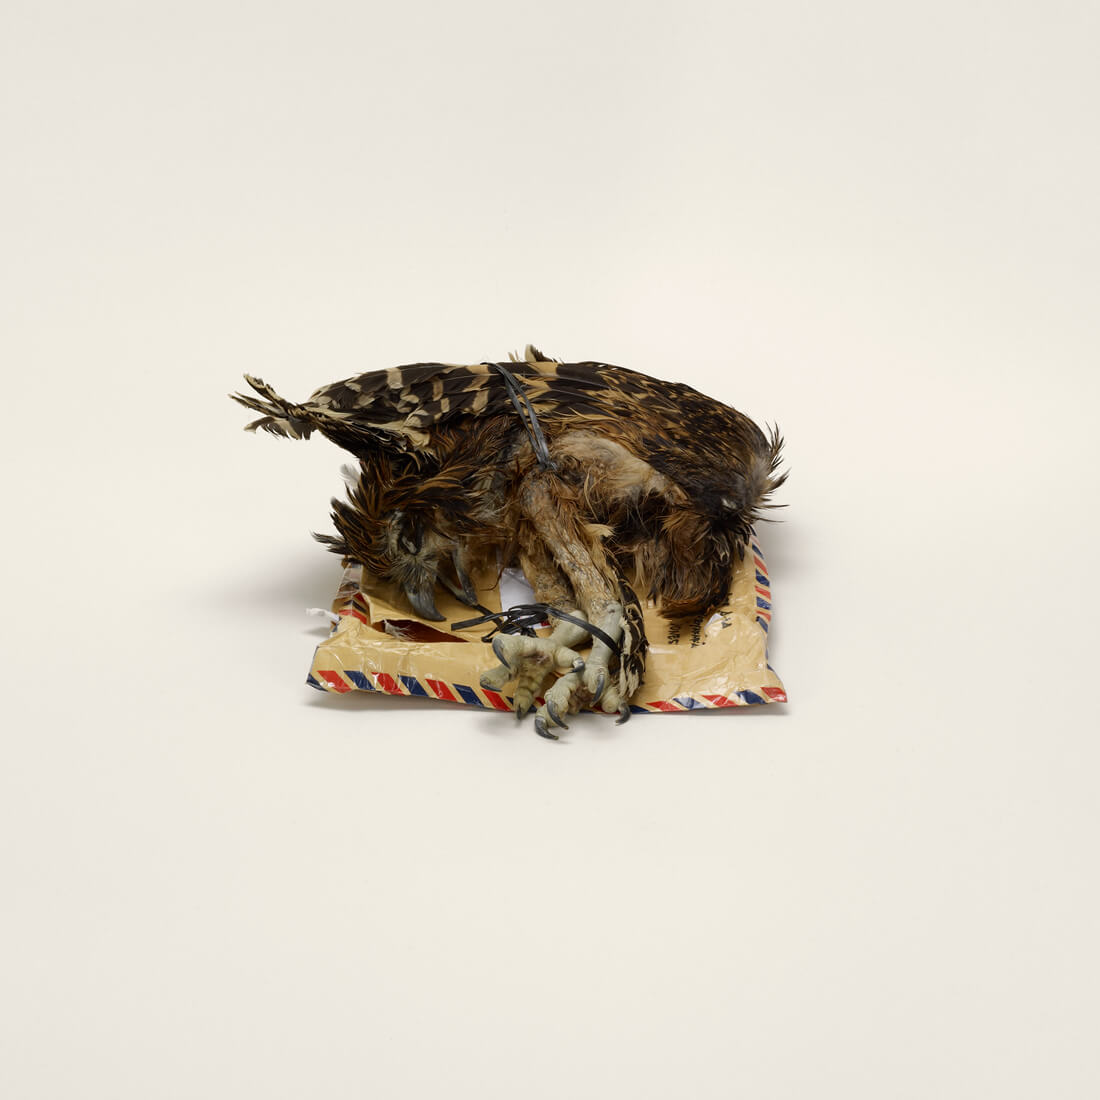 Bird corpse, labeled as home décor, Indonesia to Miami, Florida (prohibited)